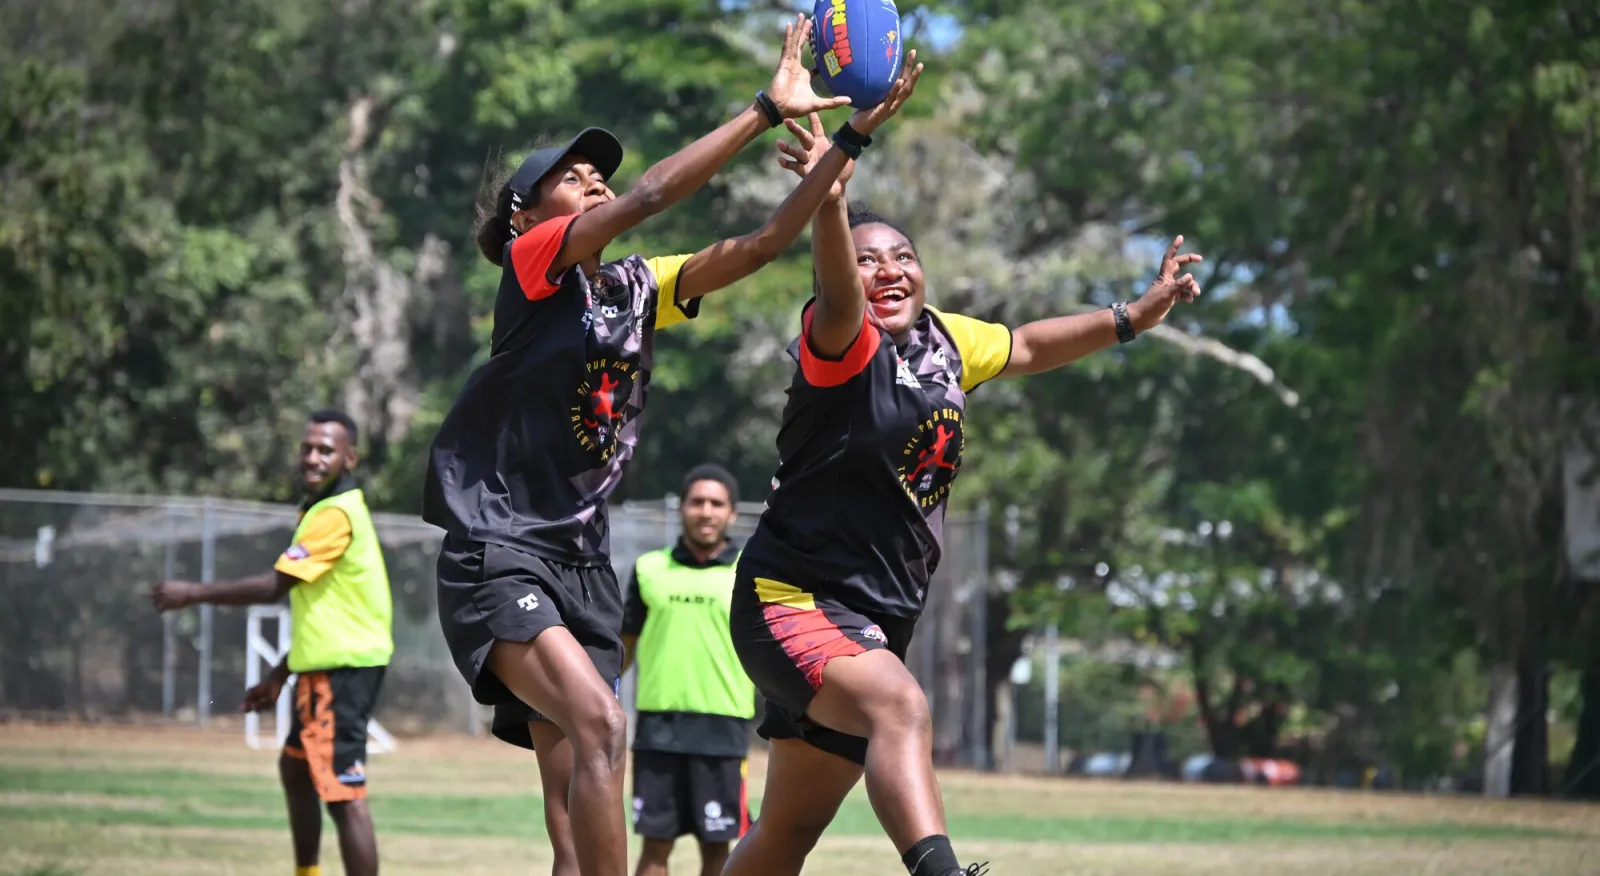 Two people are playing AFL football and reaching for the ball mid-air. They're wearing team uniforms and smiling in an outdoor setting.